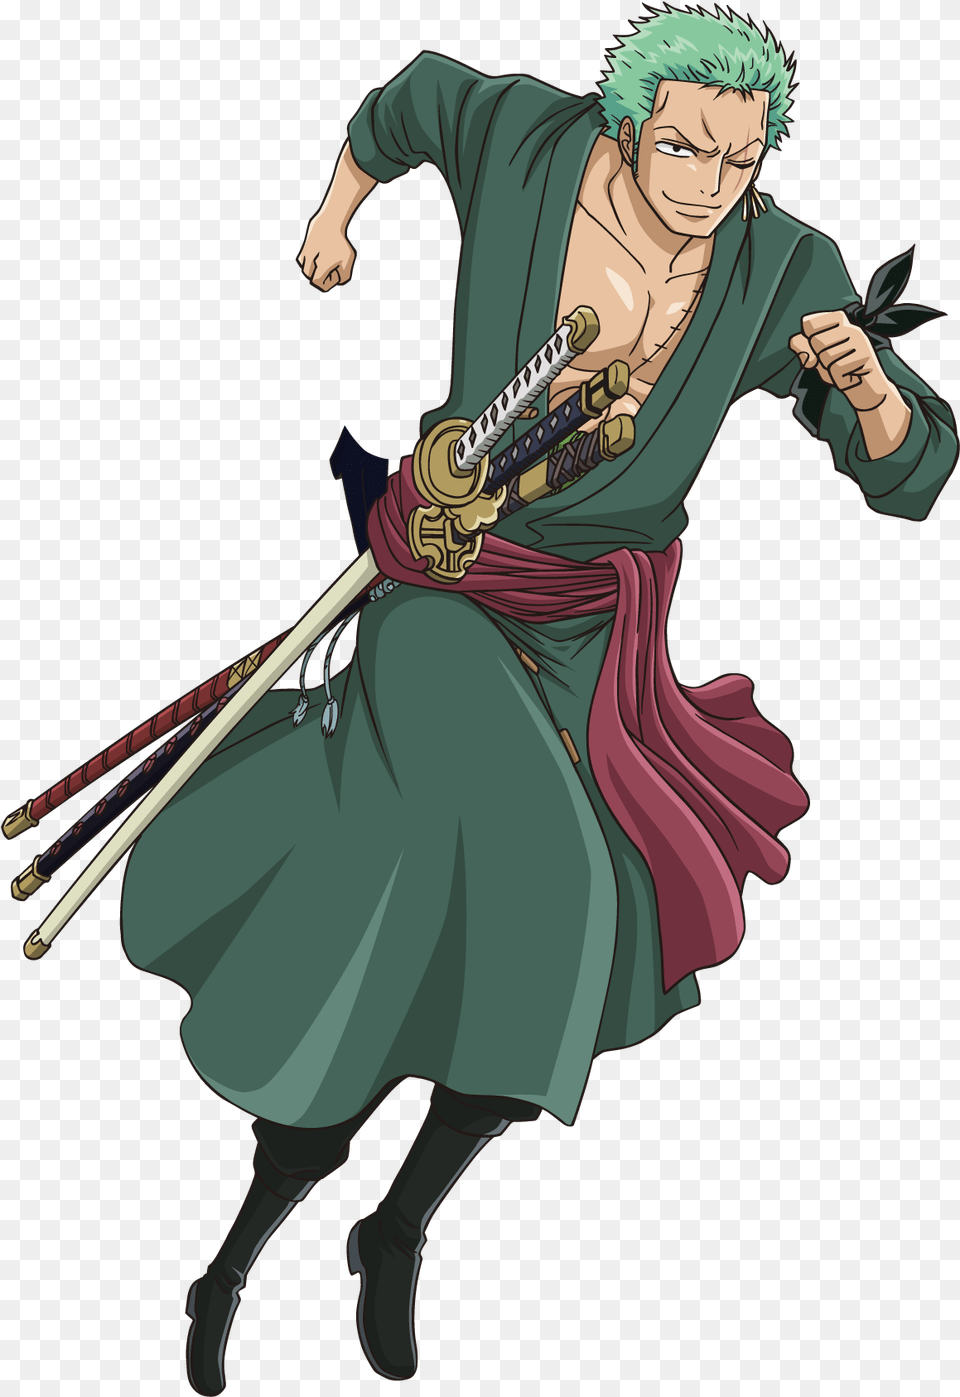 One Piece Zoro Run Download Zoro One Piece, Adult, Person, Woman, Female Png